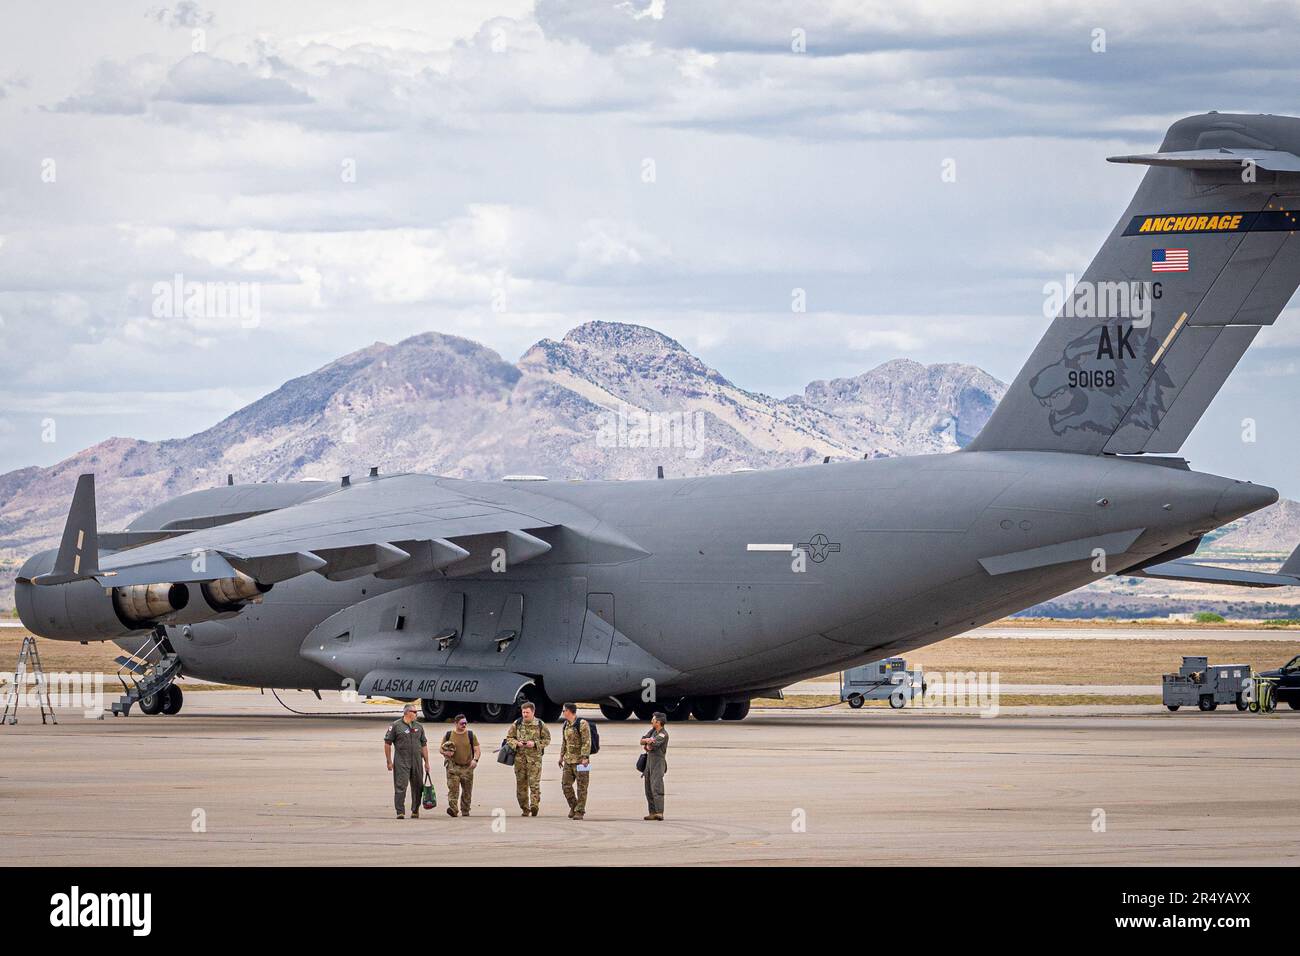 U.S. Air Force C-17 Globemaster III aircrew members assigned to the 517th Airlift Squadron, walk from their aircraft after a training sortie, while attending the Advanced Tactics Aircrew Course at Fort Huachuca, Arizona, May 18, 2023. Since 1983 the Advanced Airlift Tactics Training Center has provided advanced tactical training to airlift aircrews from the Air National Guard, Air Force Reserve Command, Air Mobility Command, U.S. Marine Corps and 17 allied nations. (U.S. Air Force photo by Master Sgt. Patrick Evenson) Stock Photo